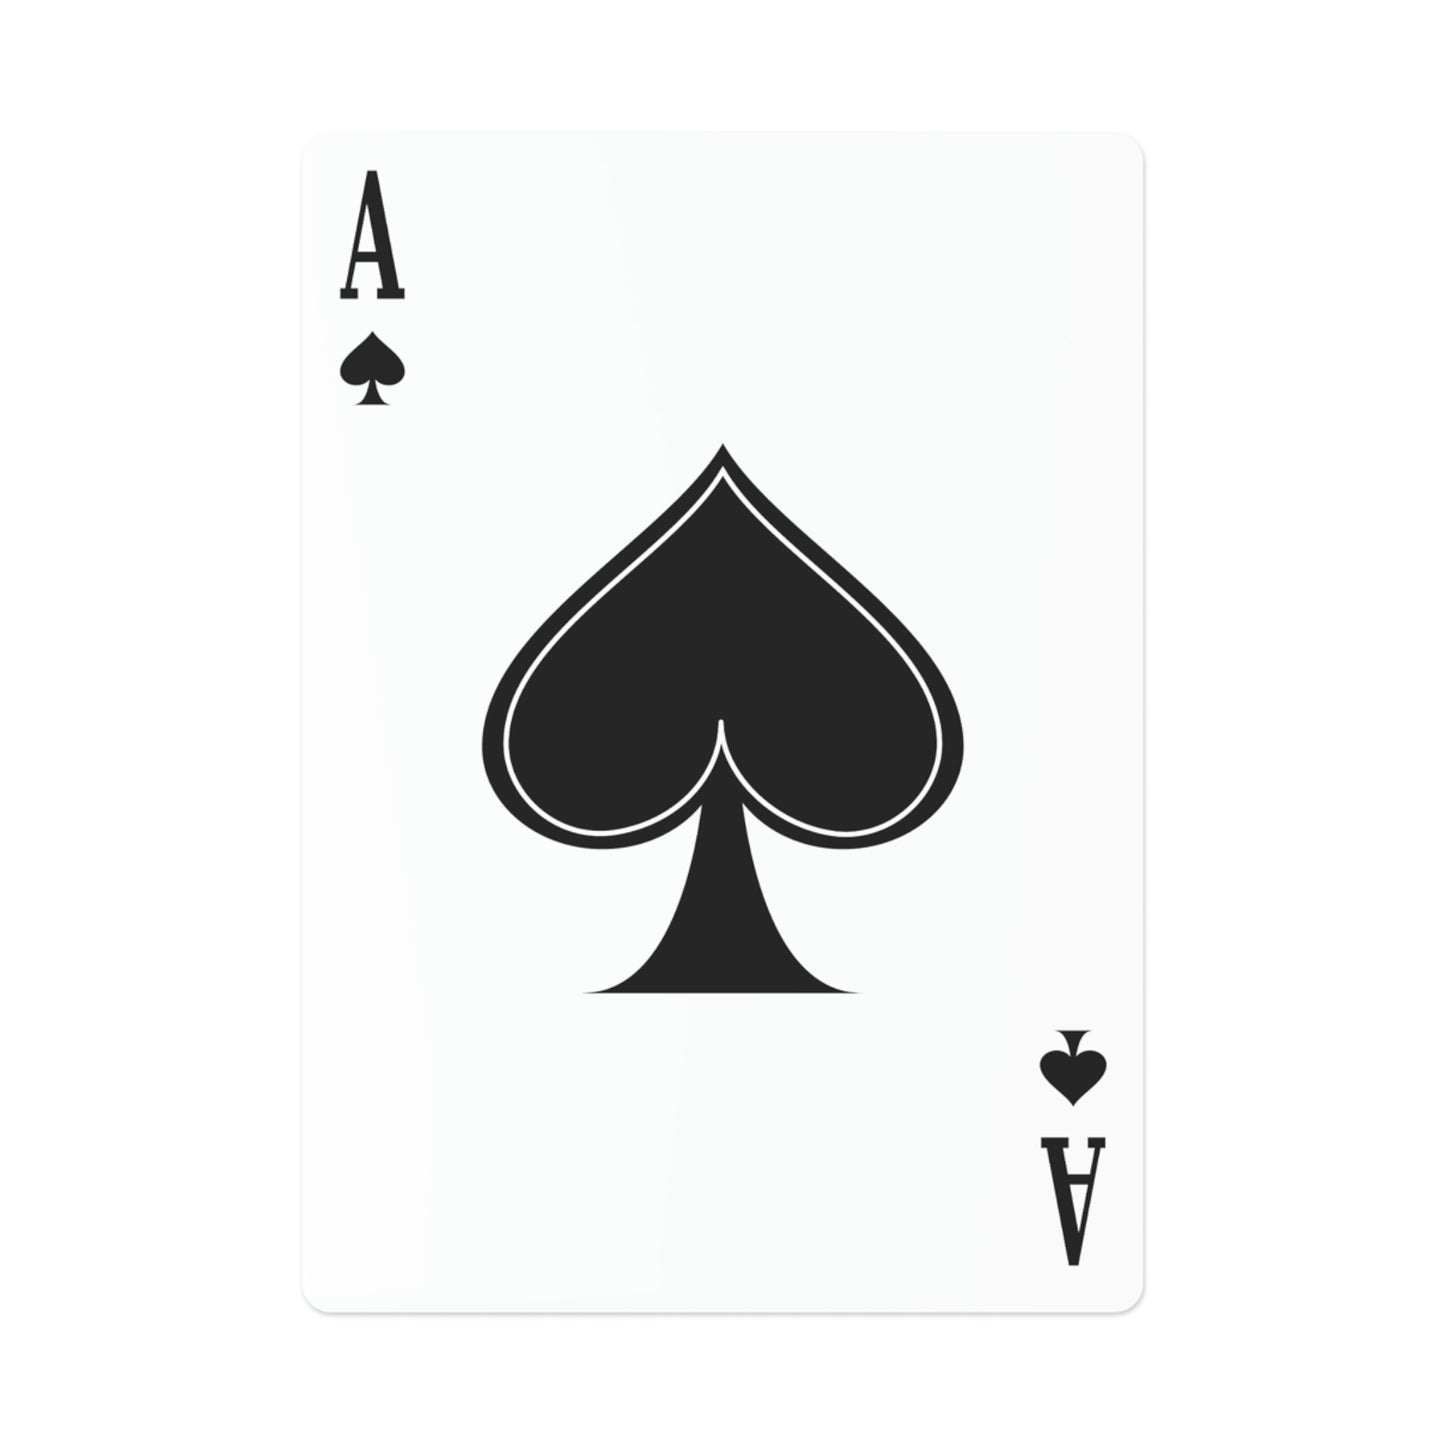 Gallowgate - Playing Cards